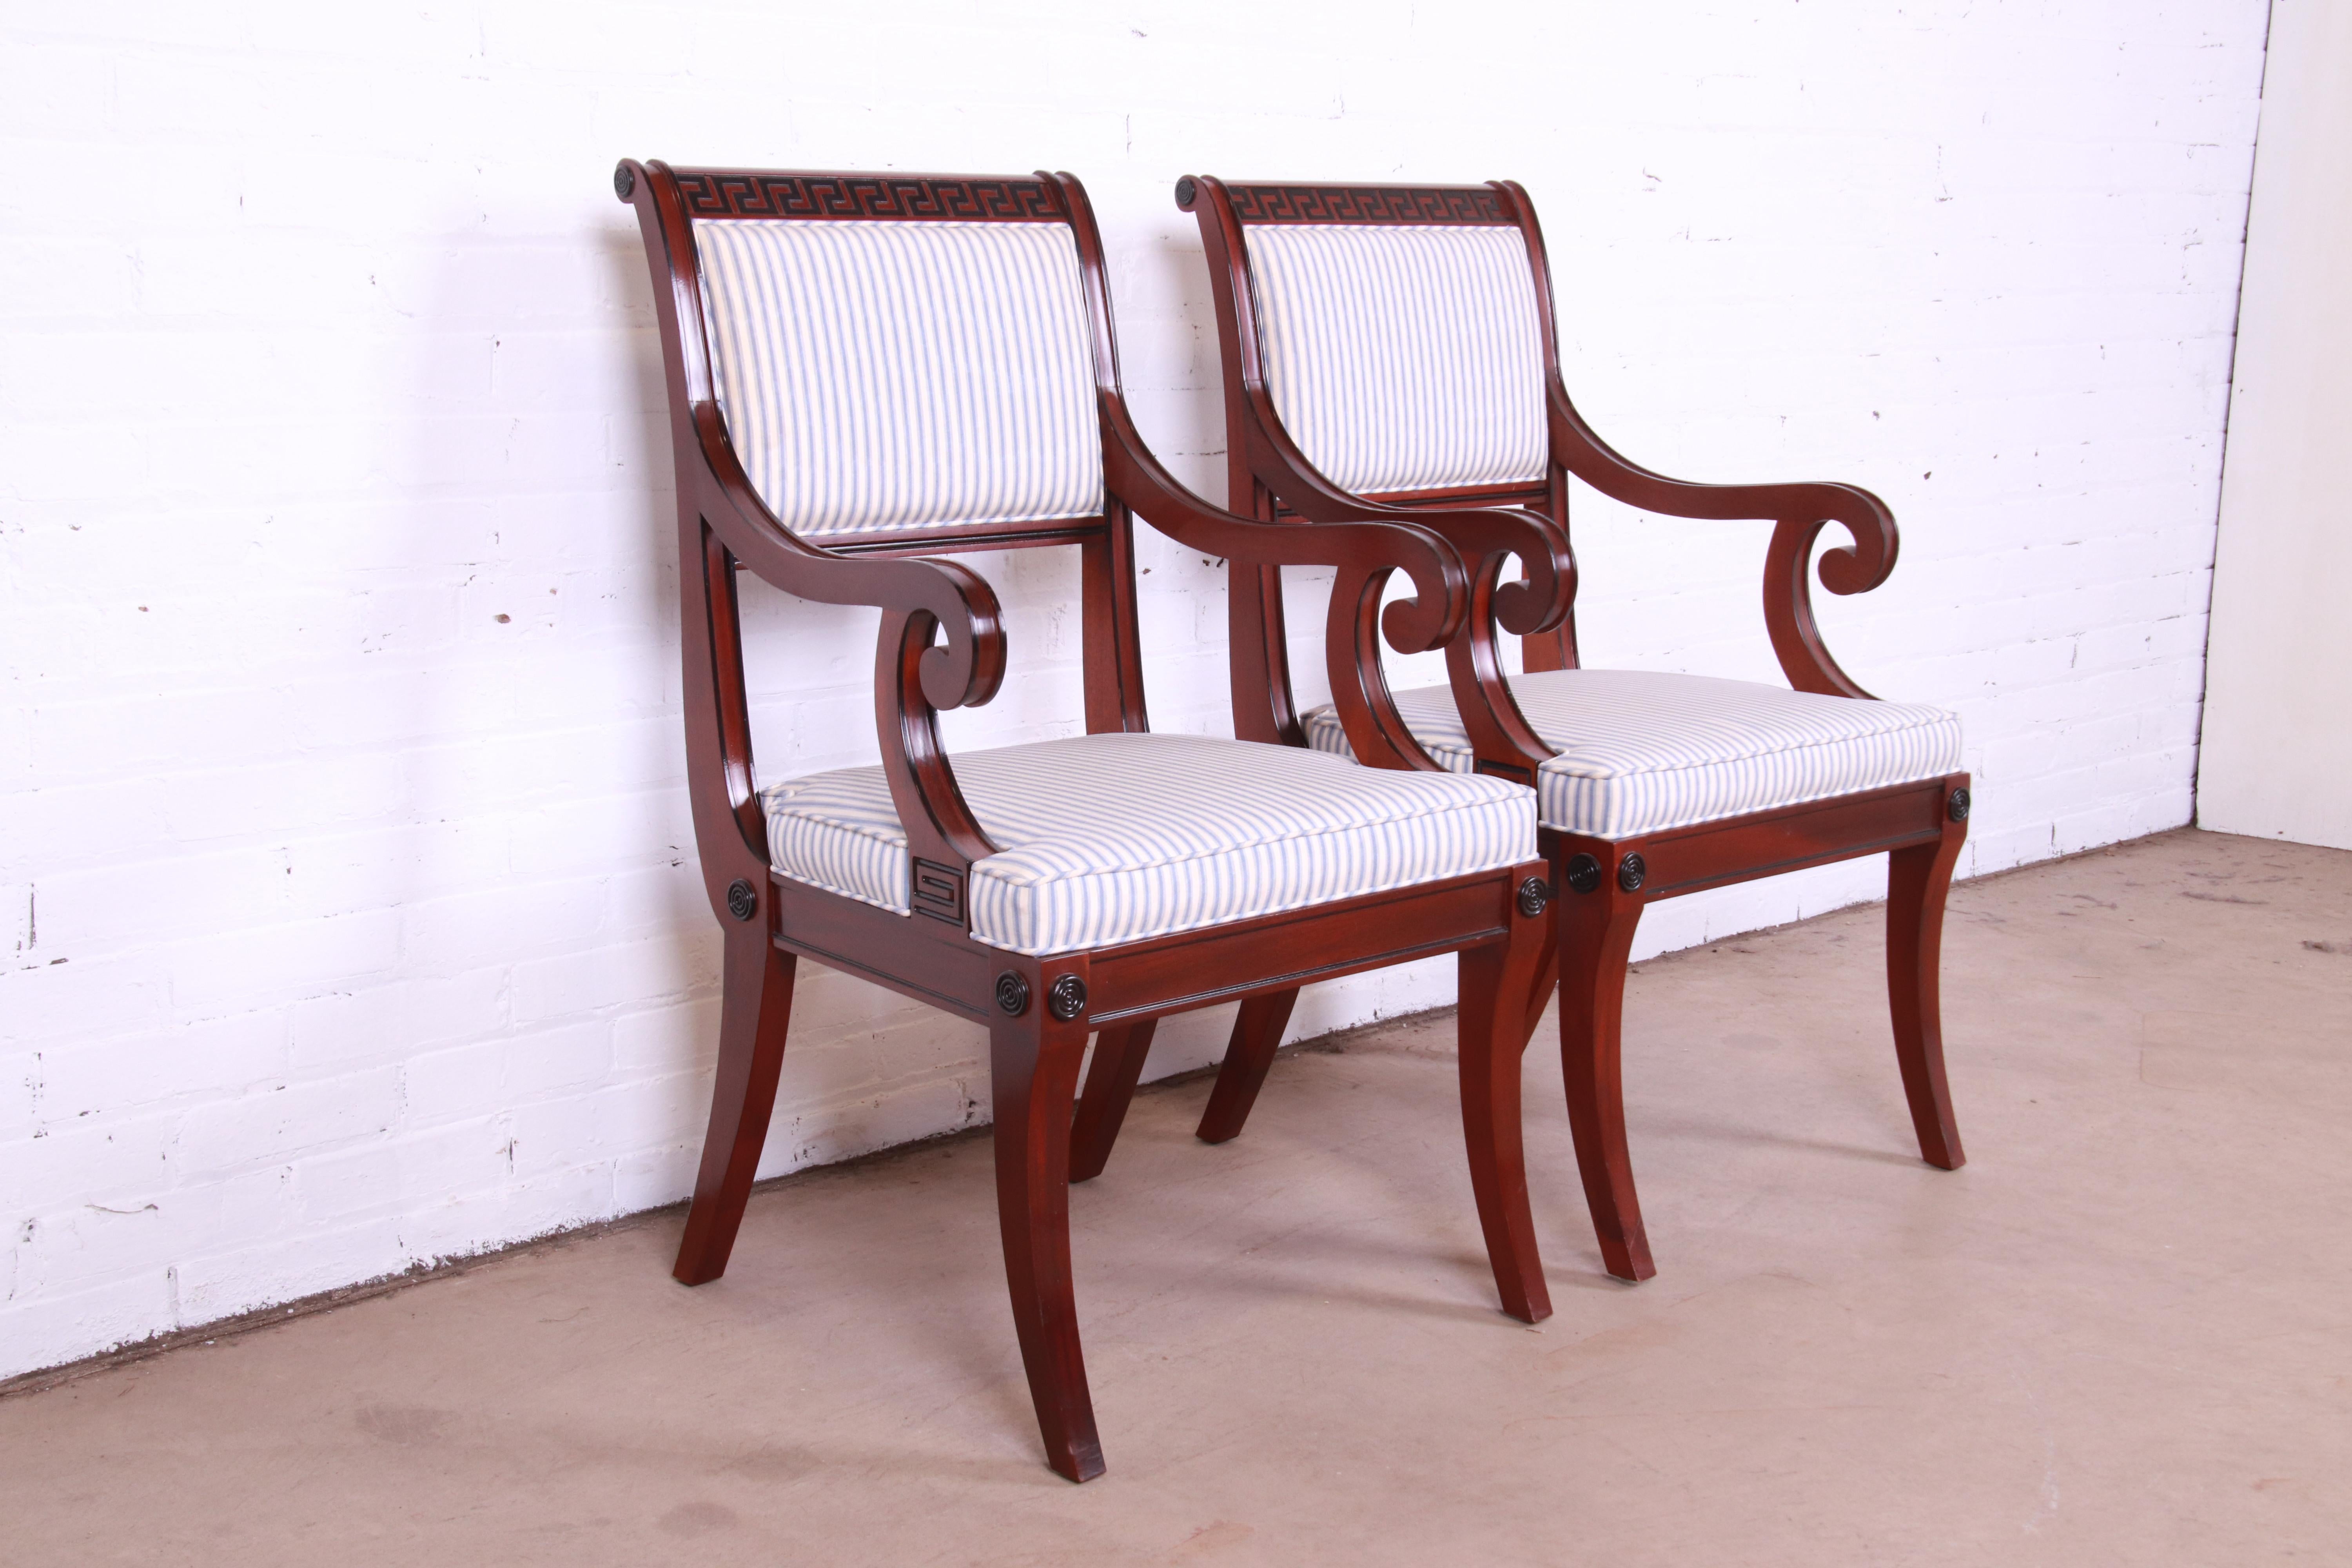 A gorgeous pair of Regency or neoclassical style club chairs or dining armchairs

By Baker Furniture

USA, late 20th century

Solid carved mahogany frames, with ebonized Greek key design, and blue & white striped upholstered